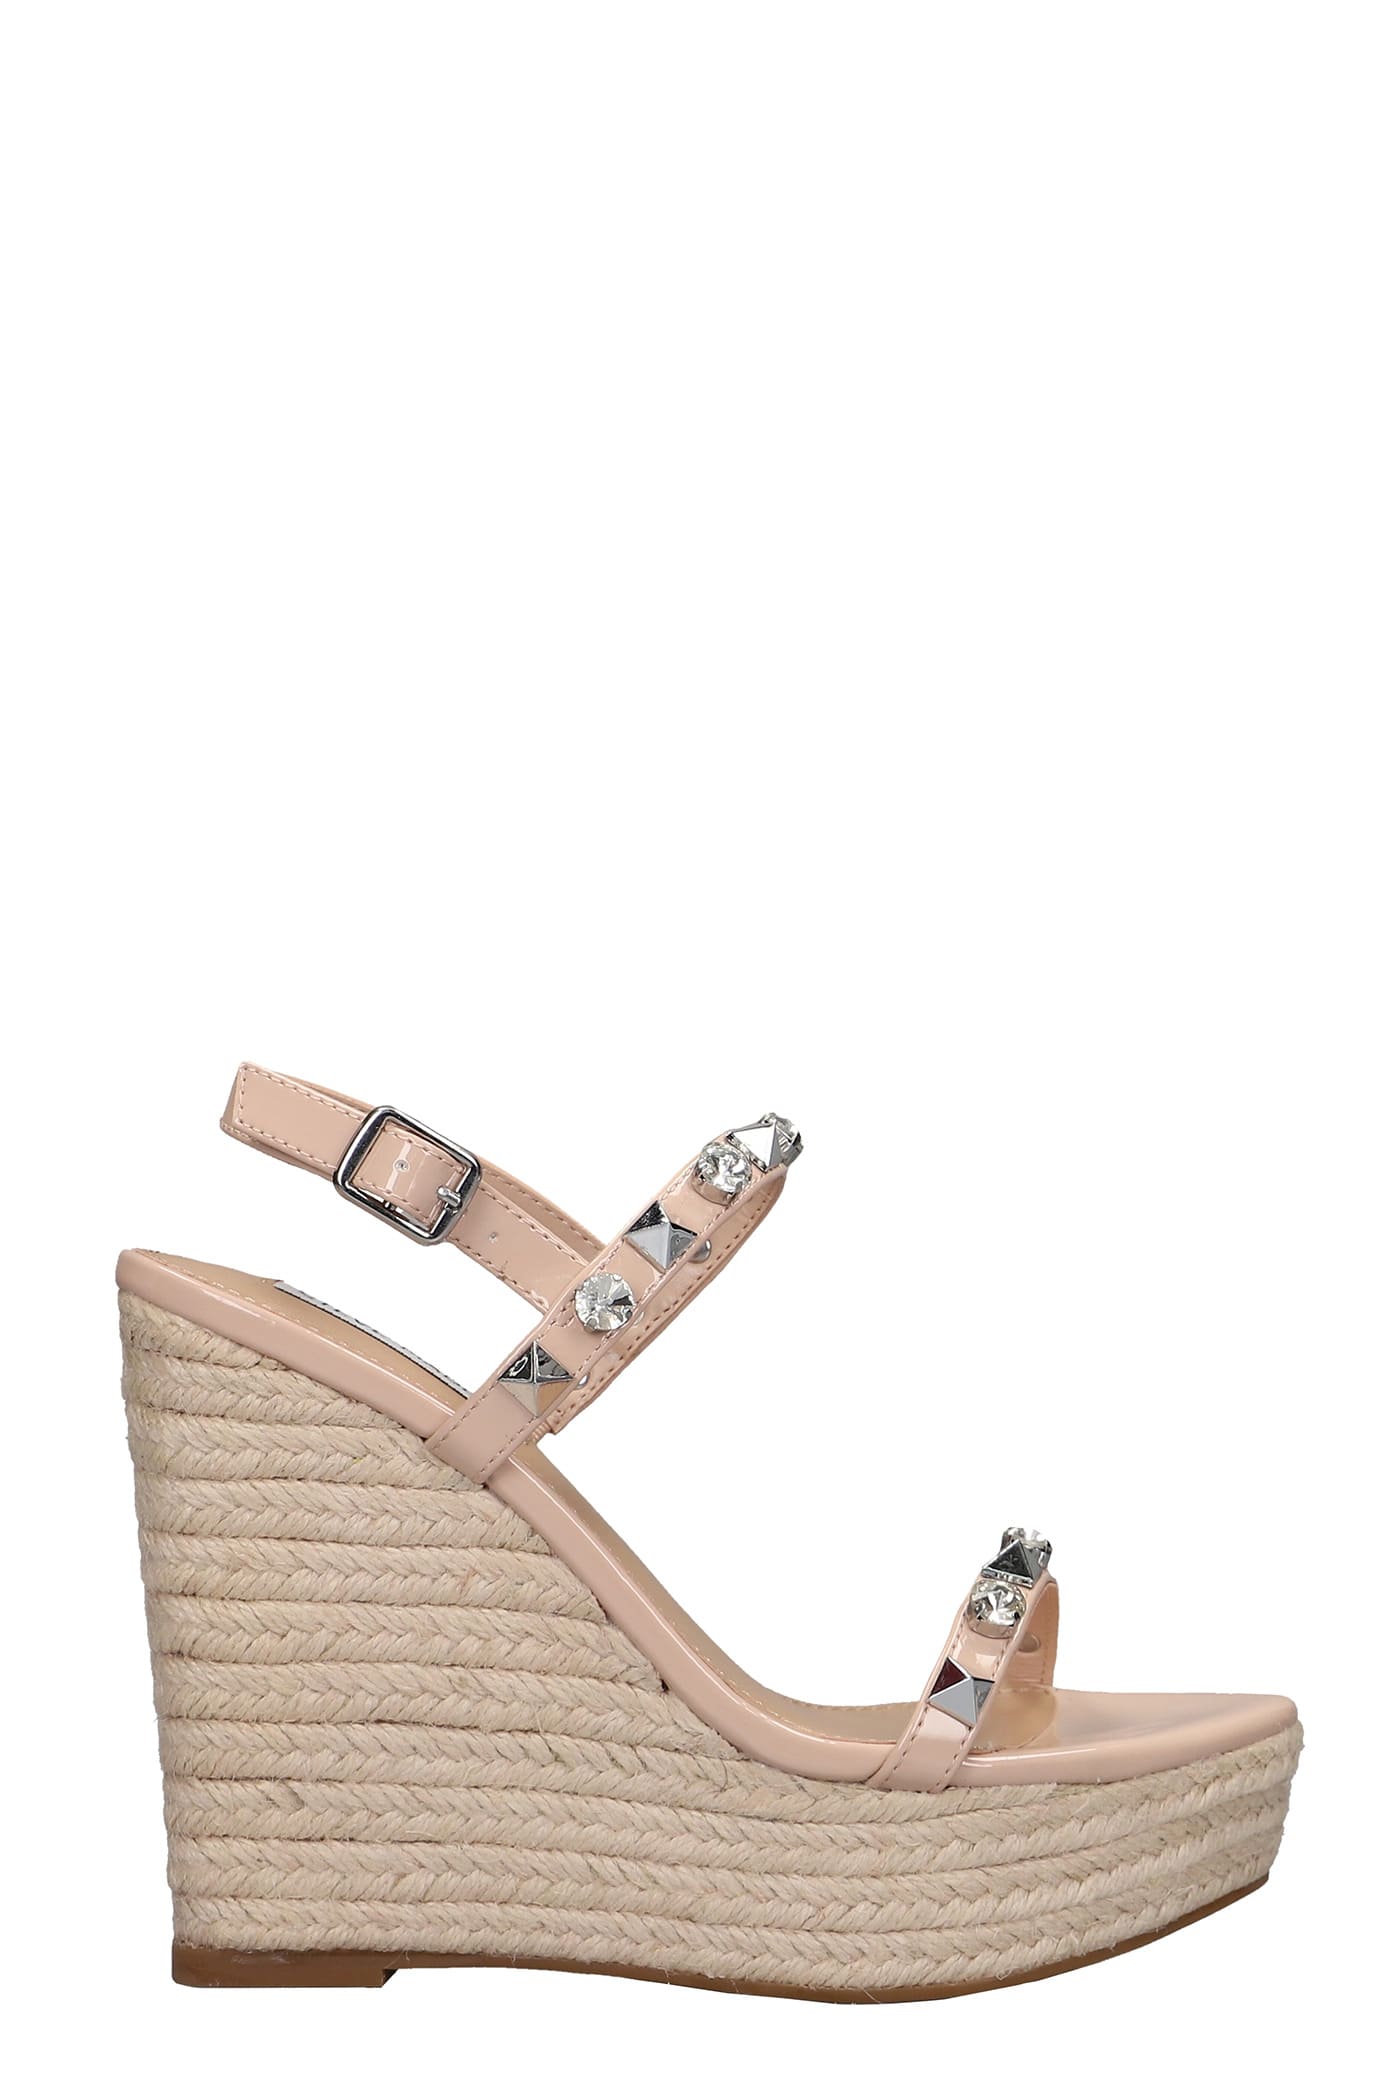 Steve Madden Prime Time Wedges In Powder Patent Leather